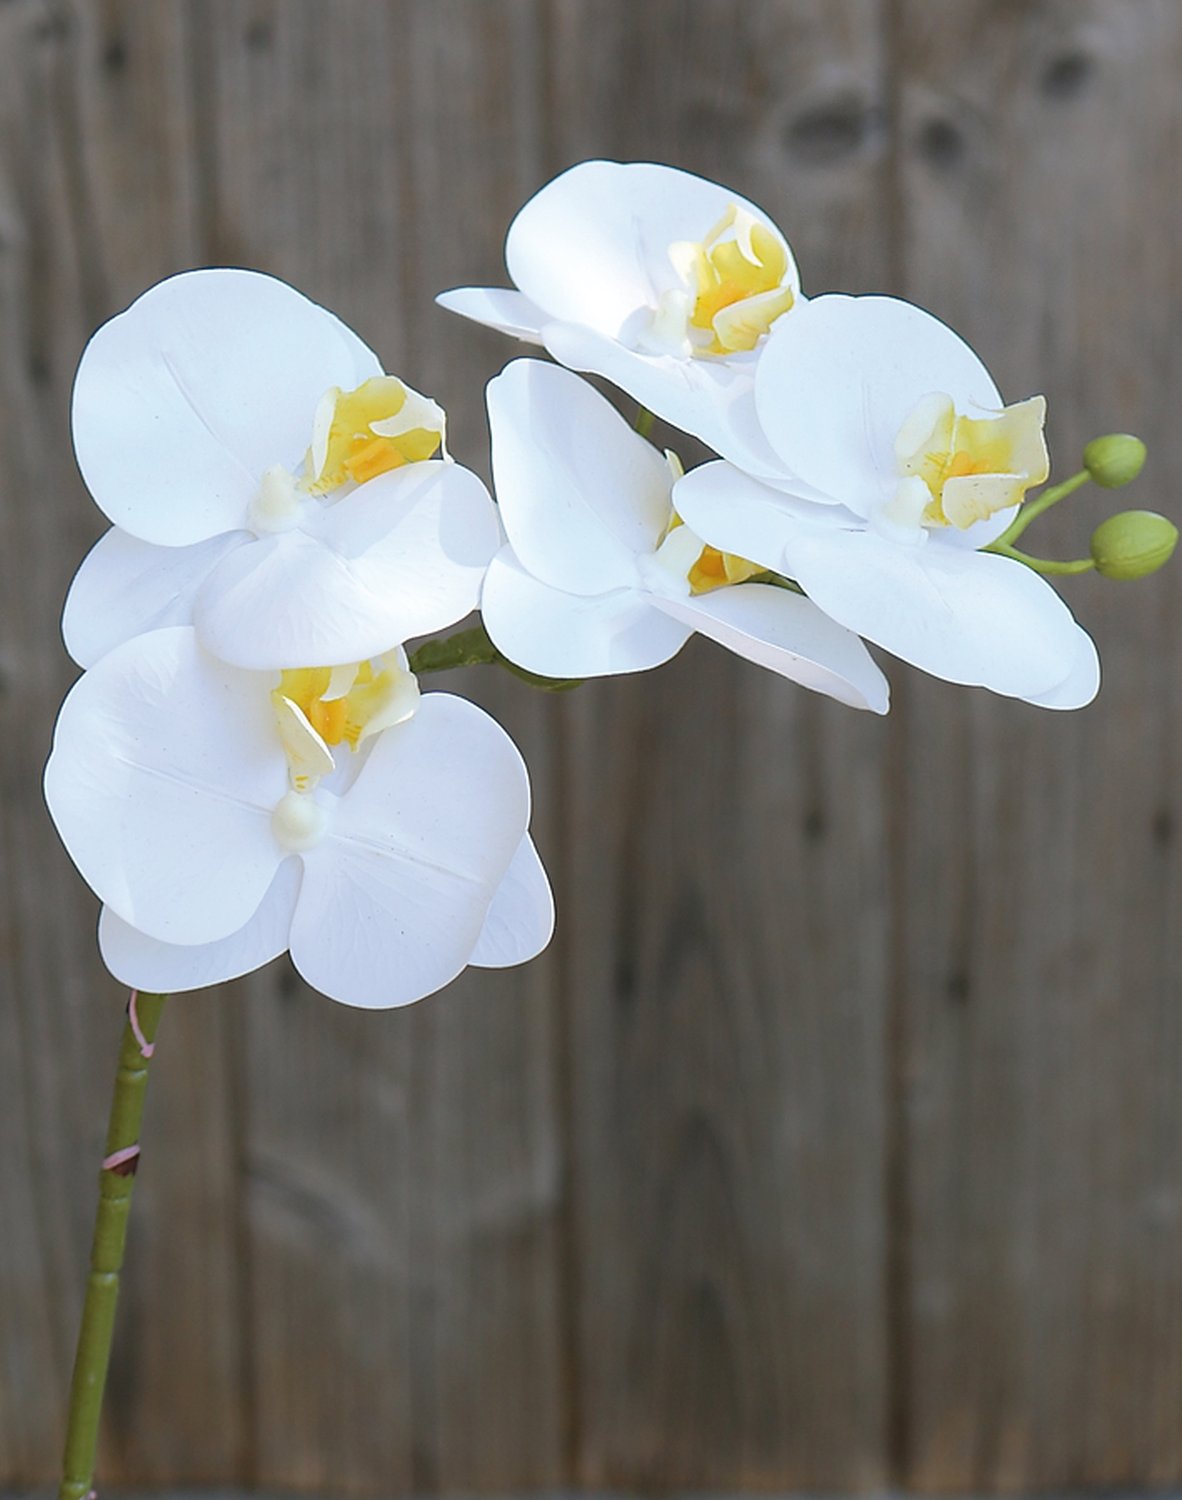 Orchidea Phalaenopsis artificiale, 64 cm, Real Touch Soft, bianco-crema